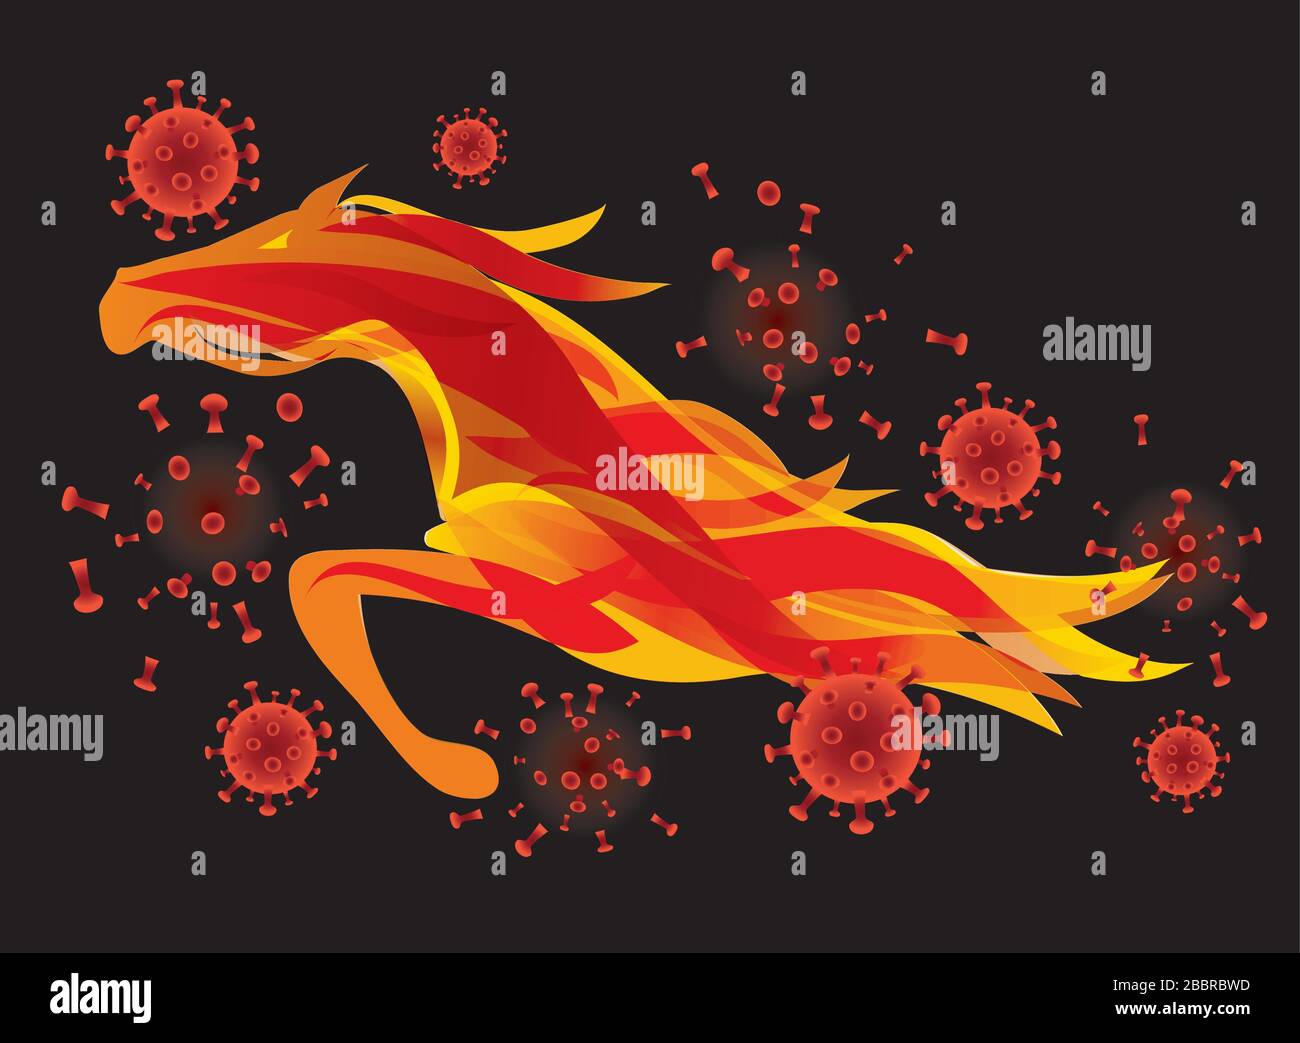 Fiery horse destroying coronavirus,metaphor of disinfectant. Illustration of orange horse. Symbol for an effective medicine, vaccine or disinfection. Stock Vector